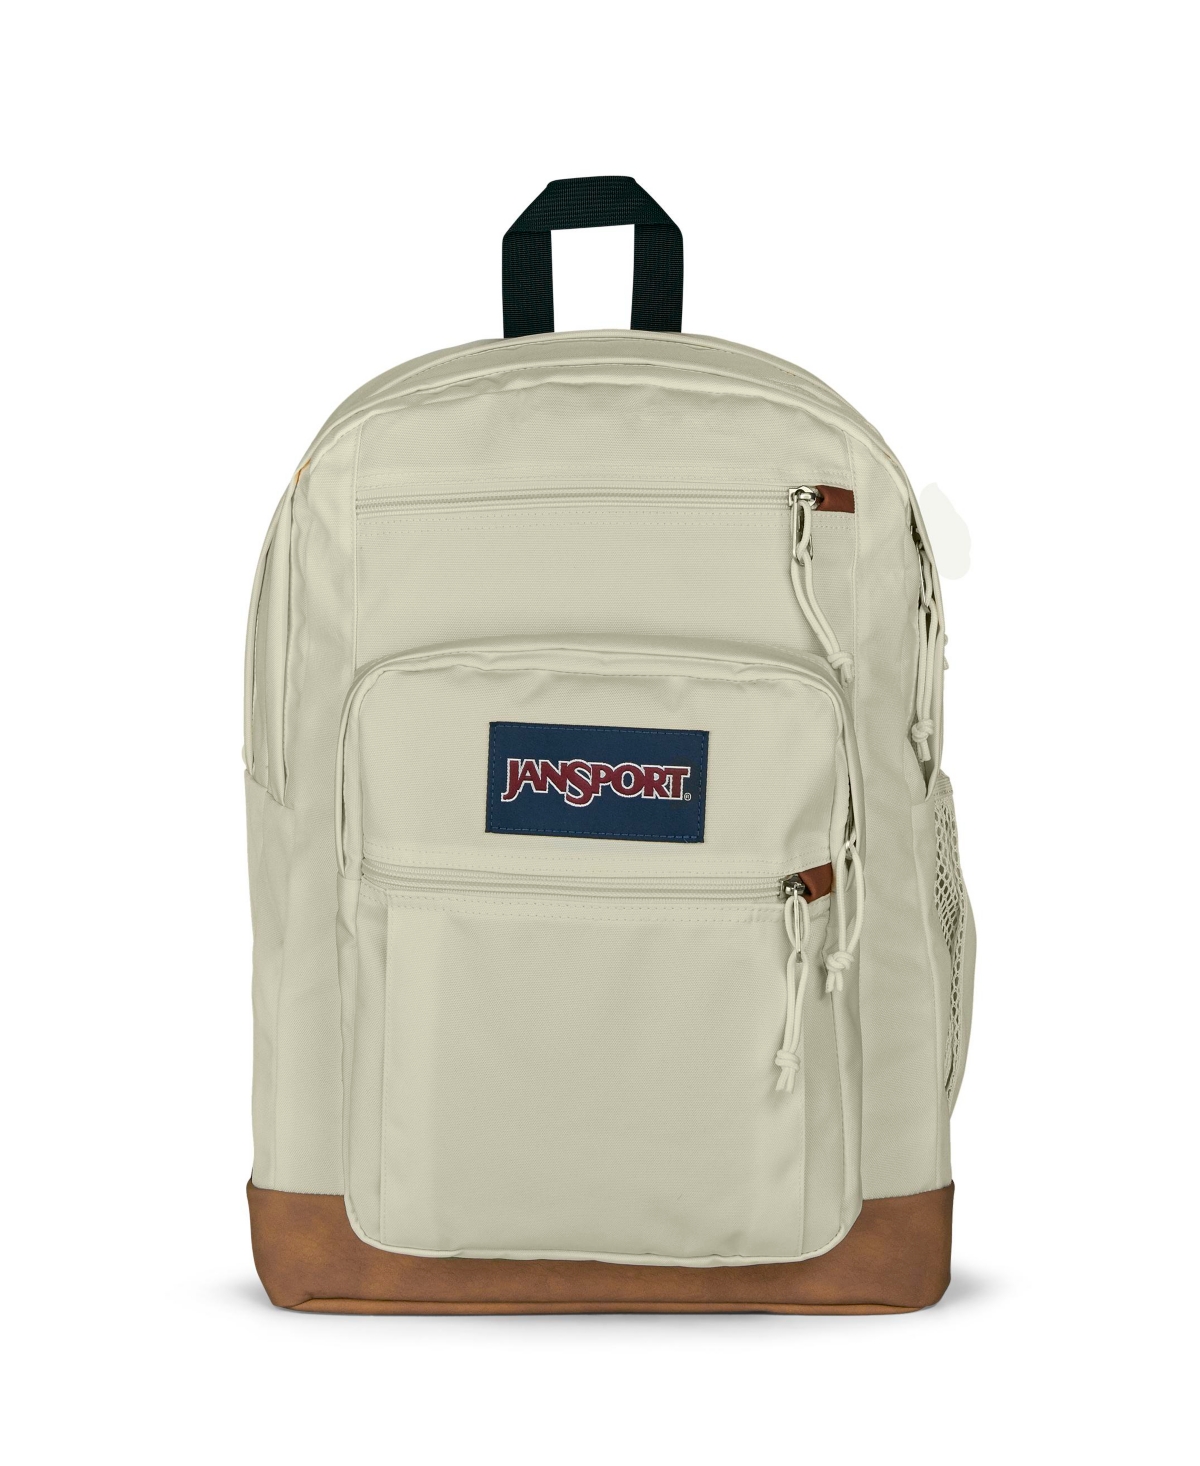 Cool Student Backpack - Navy